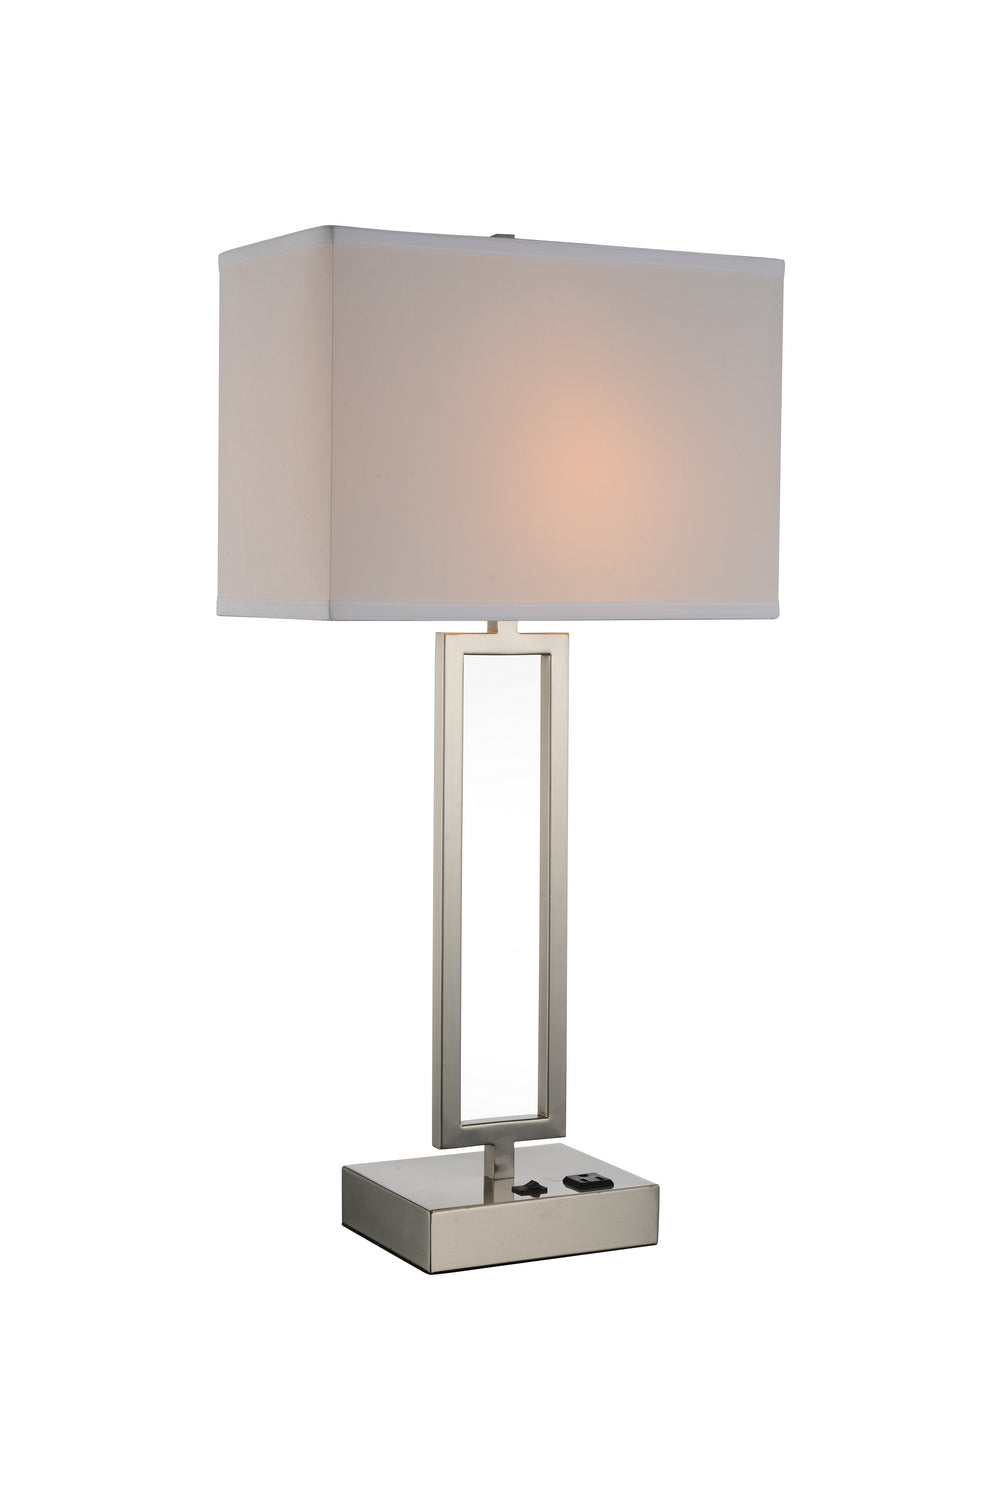 CWI Lighting One Light Table Lamp